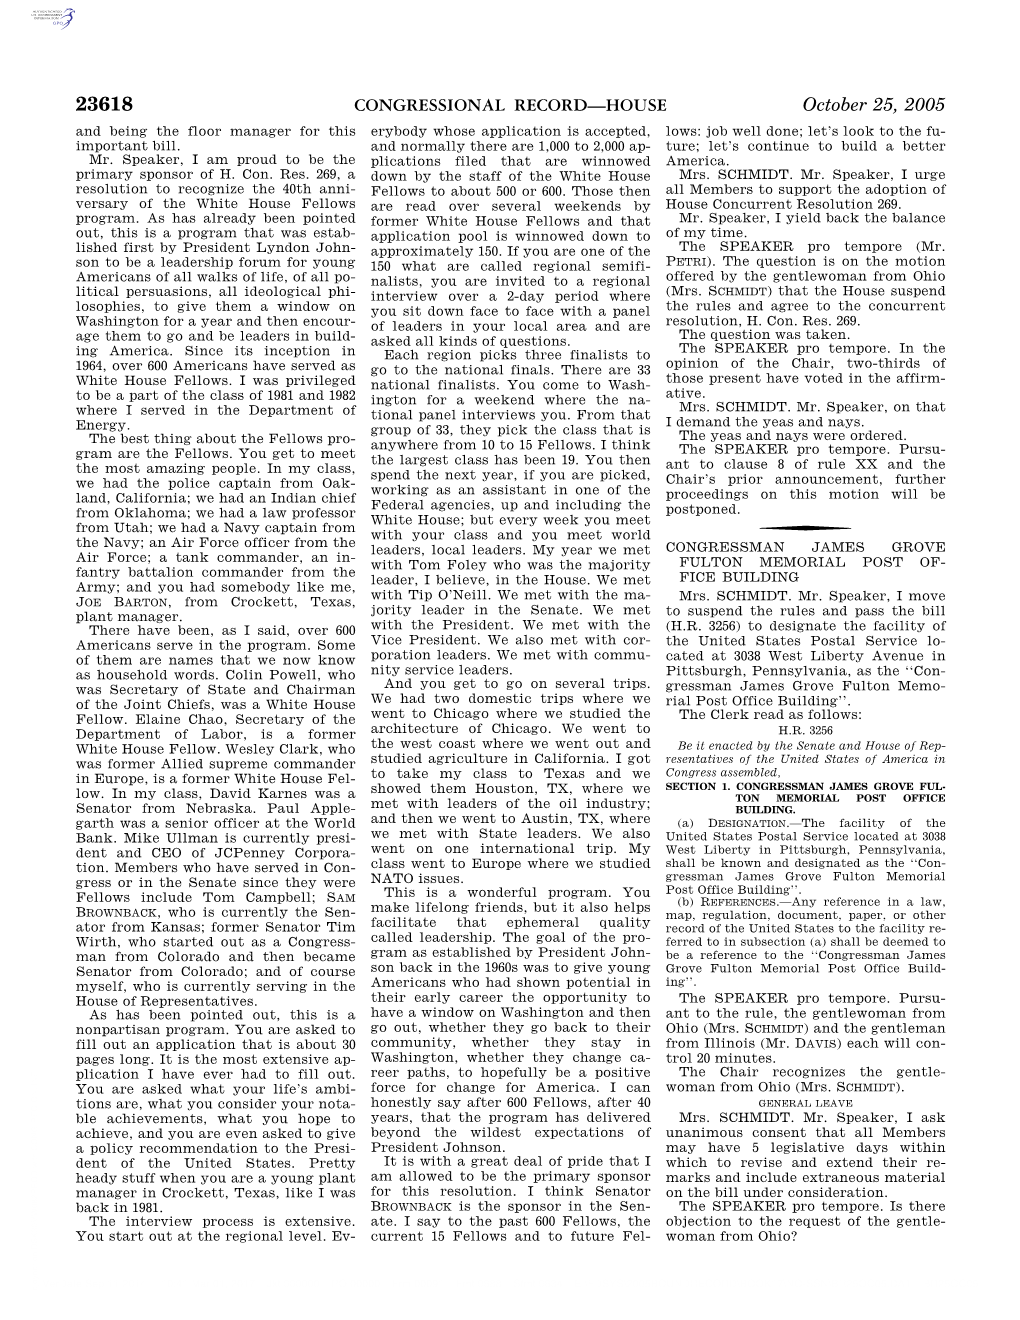 CONGRESSIONAL RECORD—HOUSE October 25, 2005